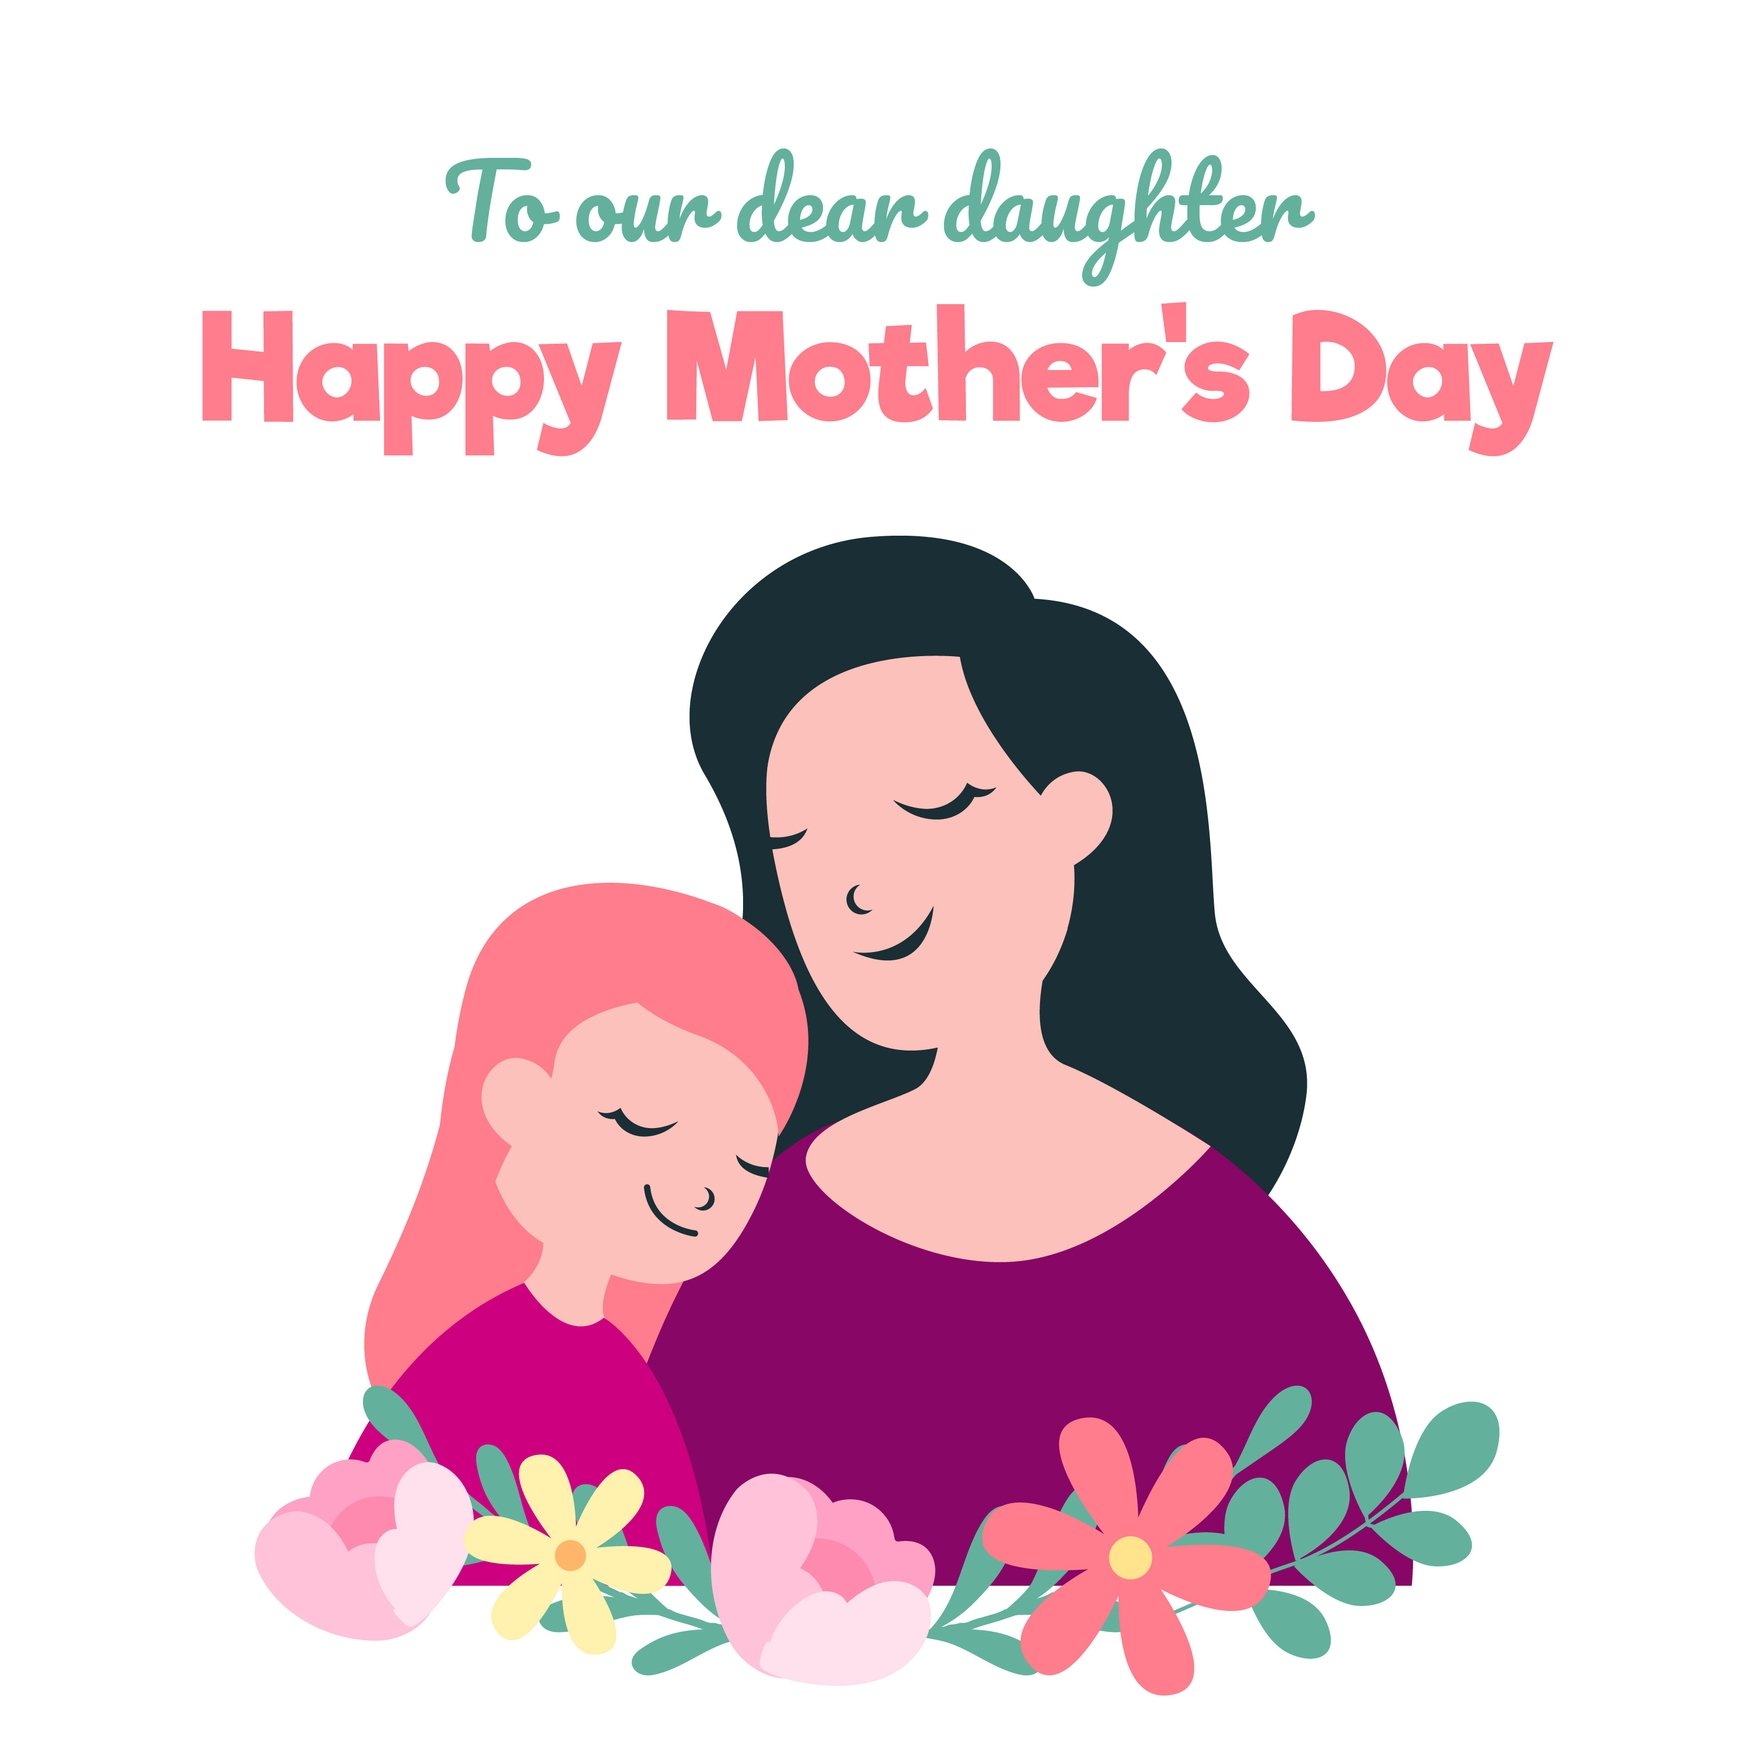 christopher jacoby recommends happy mothers day daughter gif pic